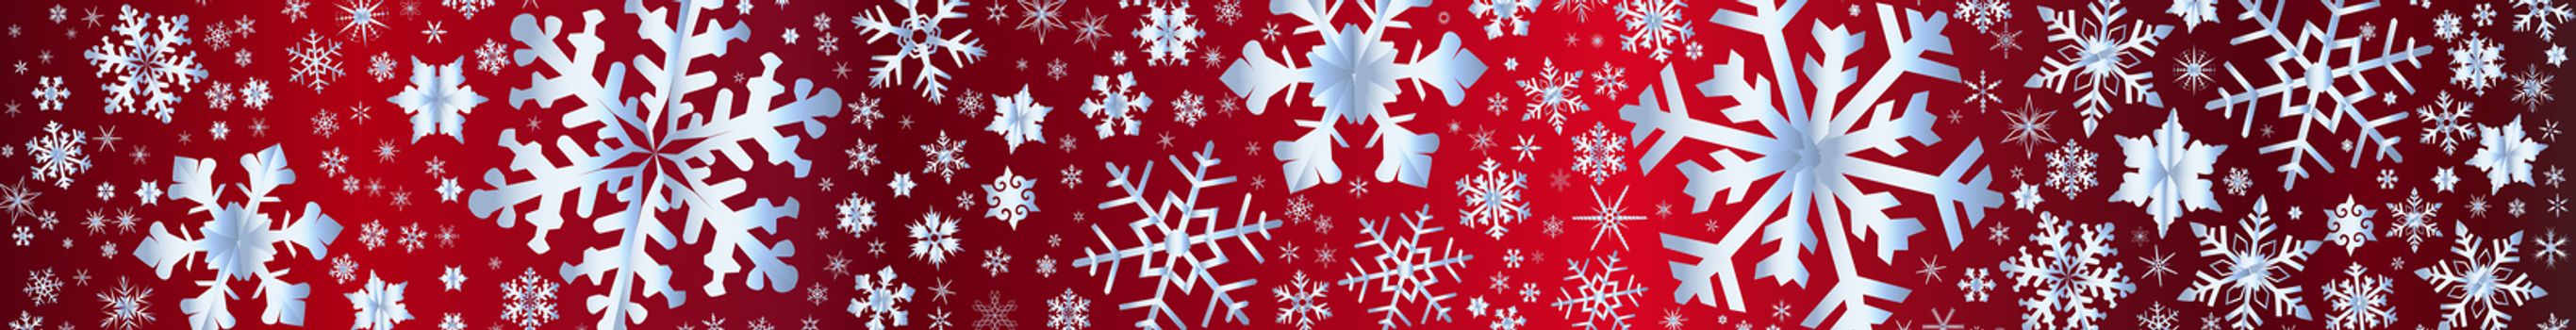 A banner of cold christmas snowflakes on a Christmas red background.